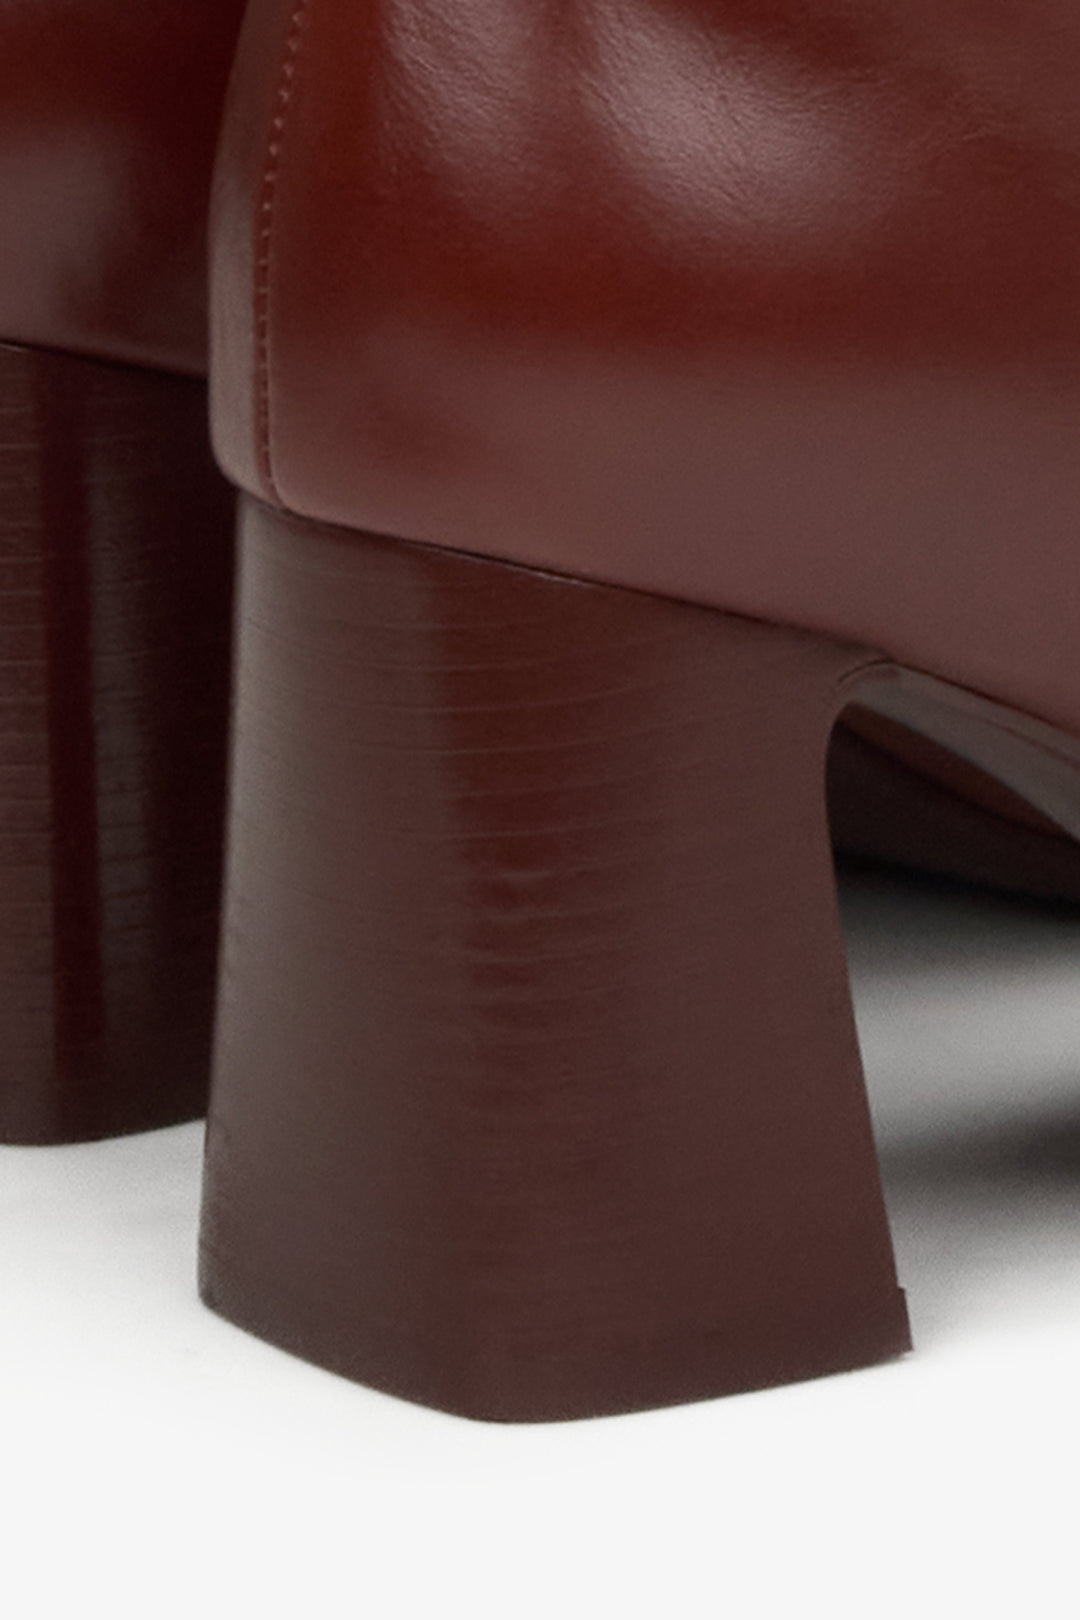 Genuine leather burgundy high boots - a close-up on details.